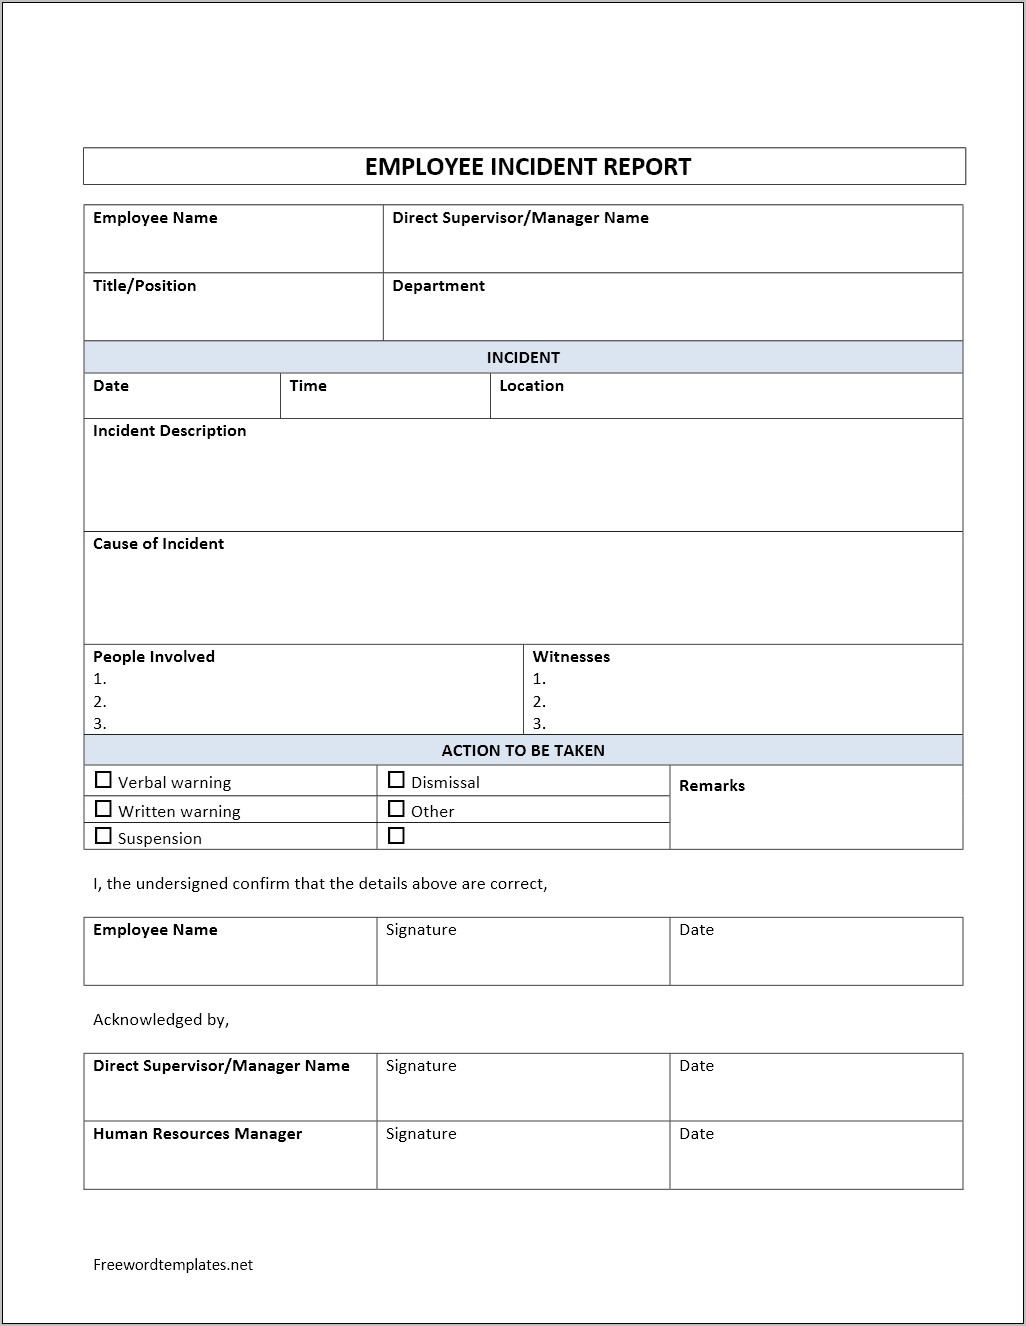 Sample Incident Report Form Word Document